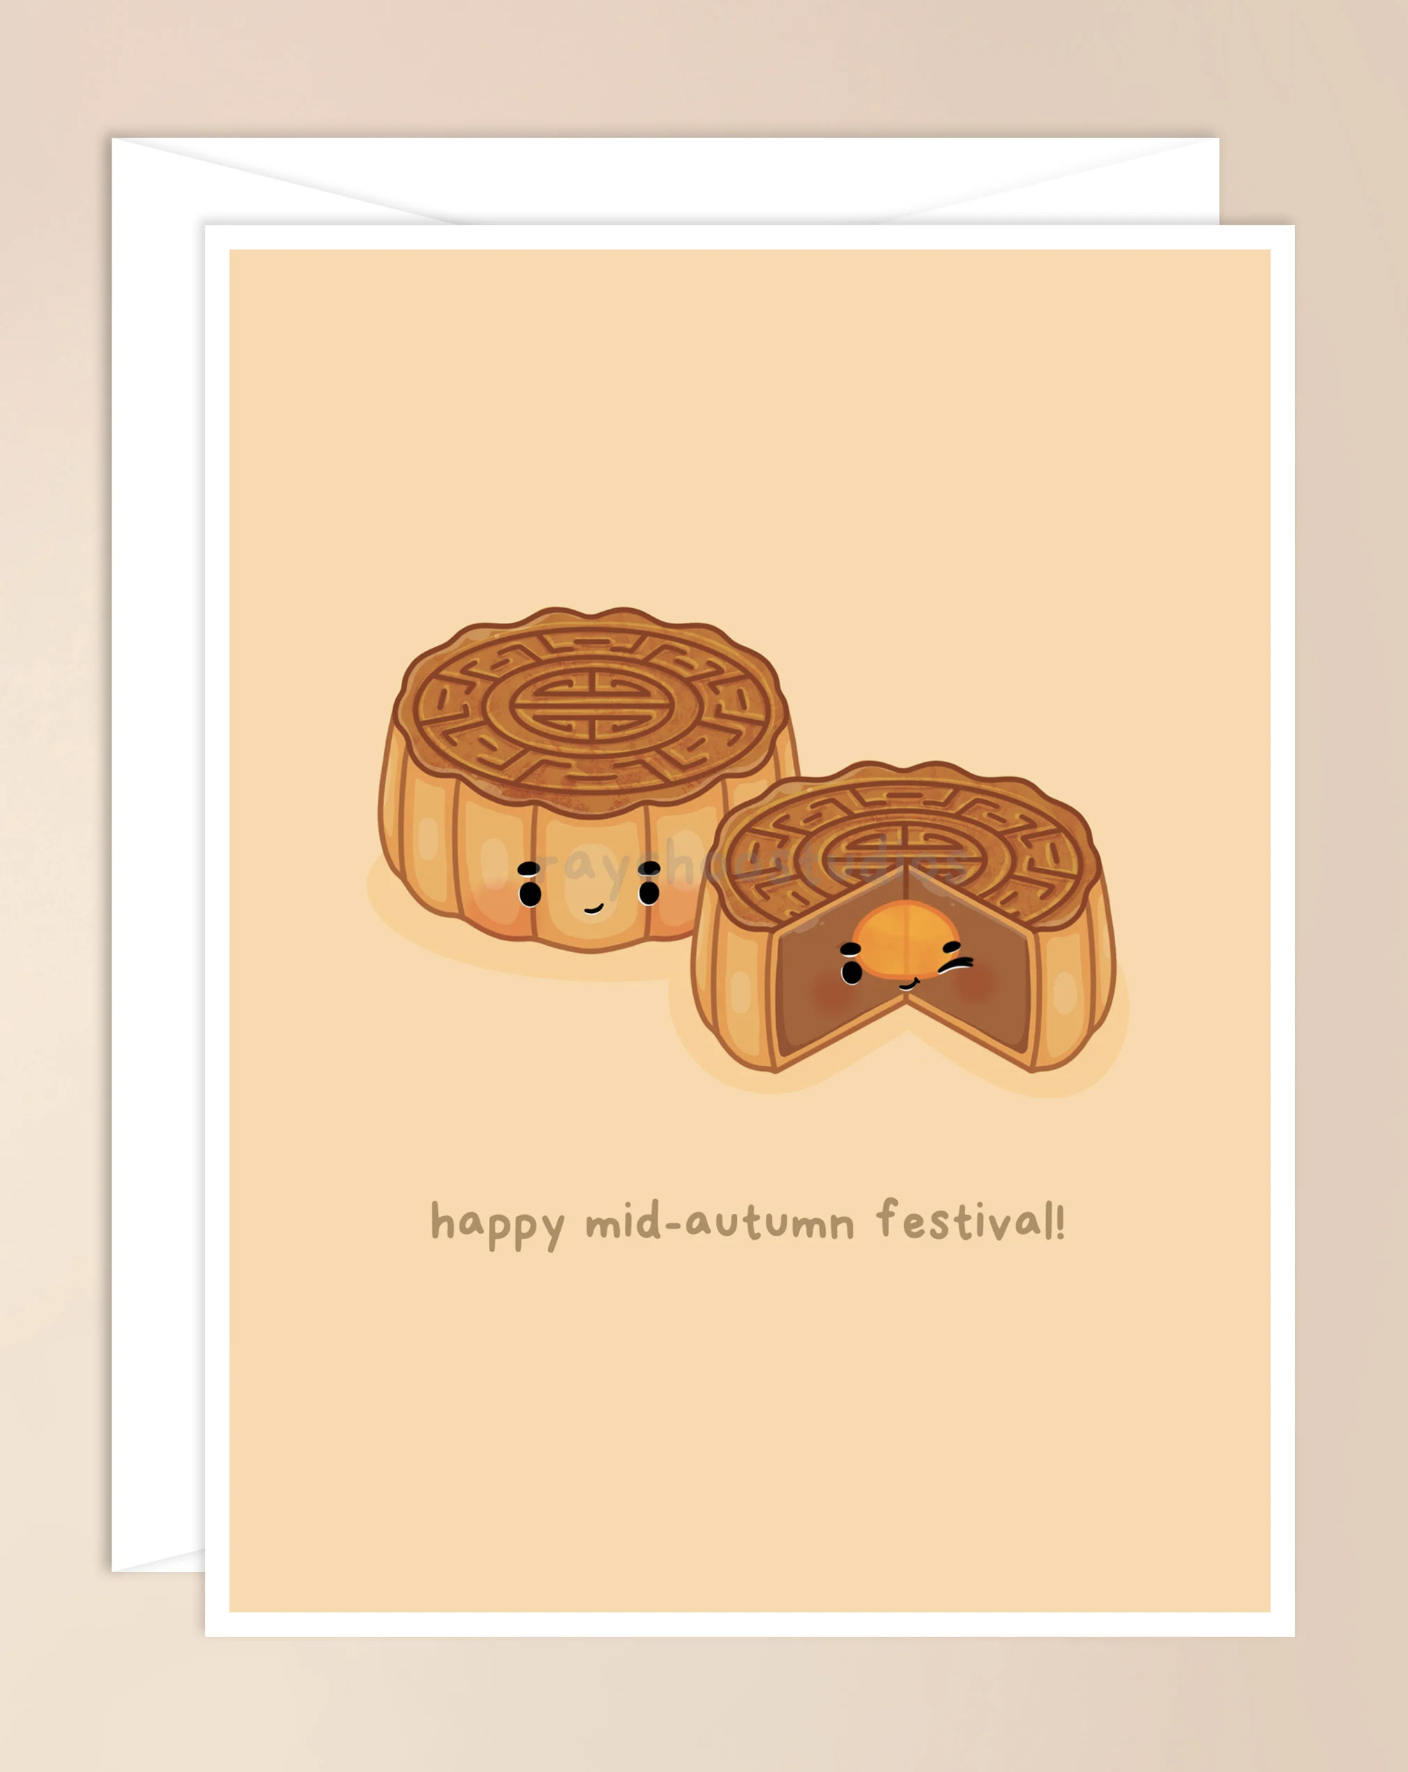 Greeting card featuring two mooncakes.